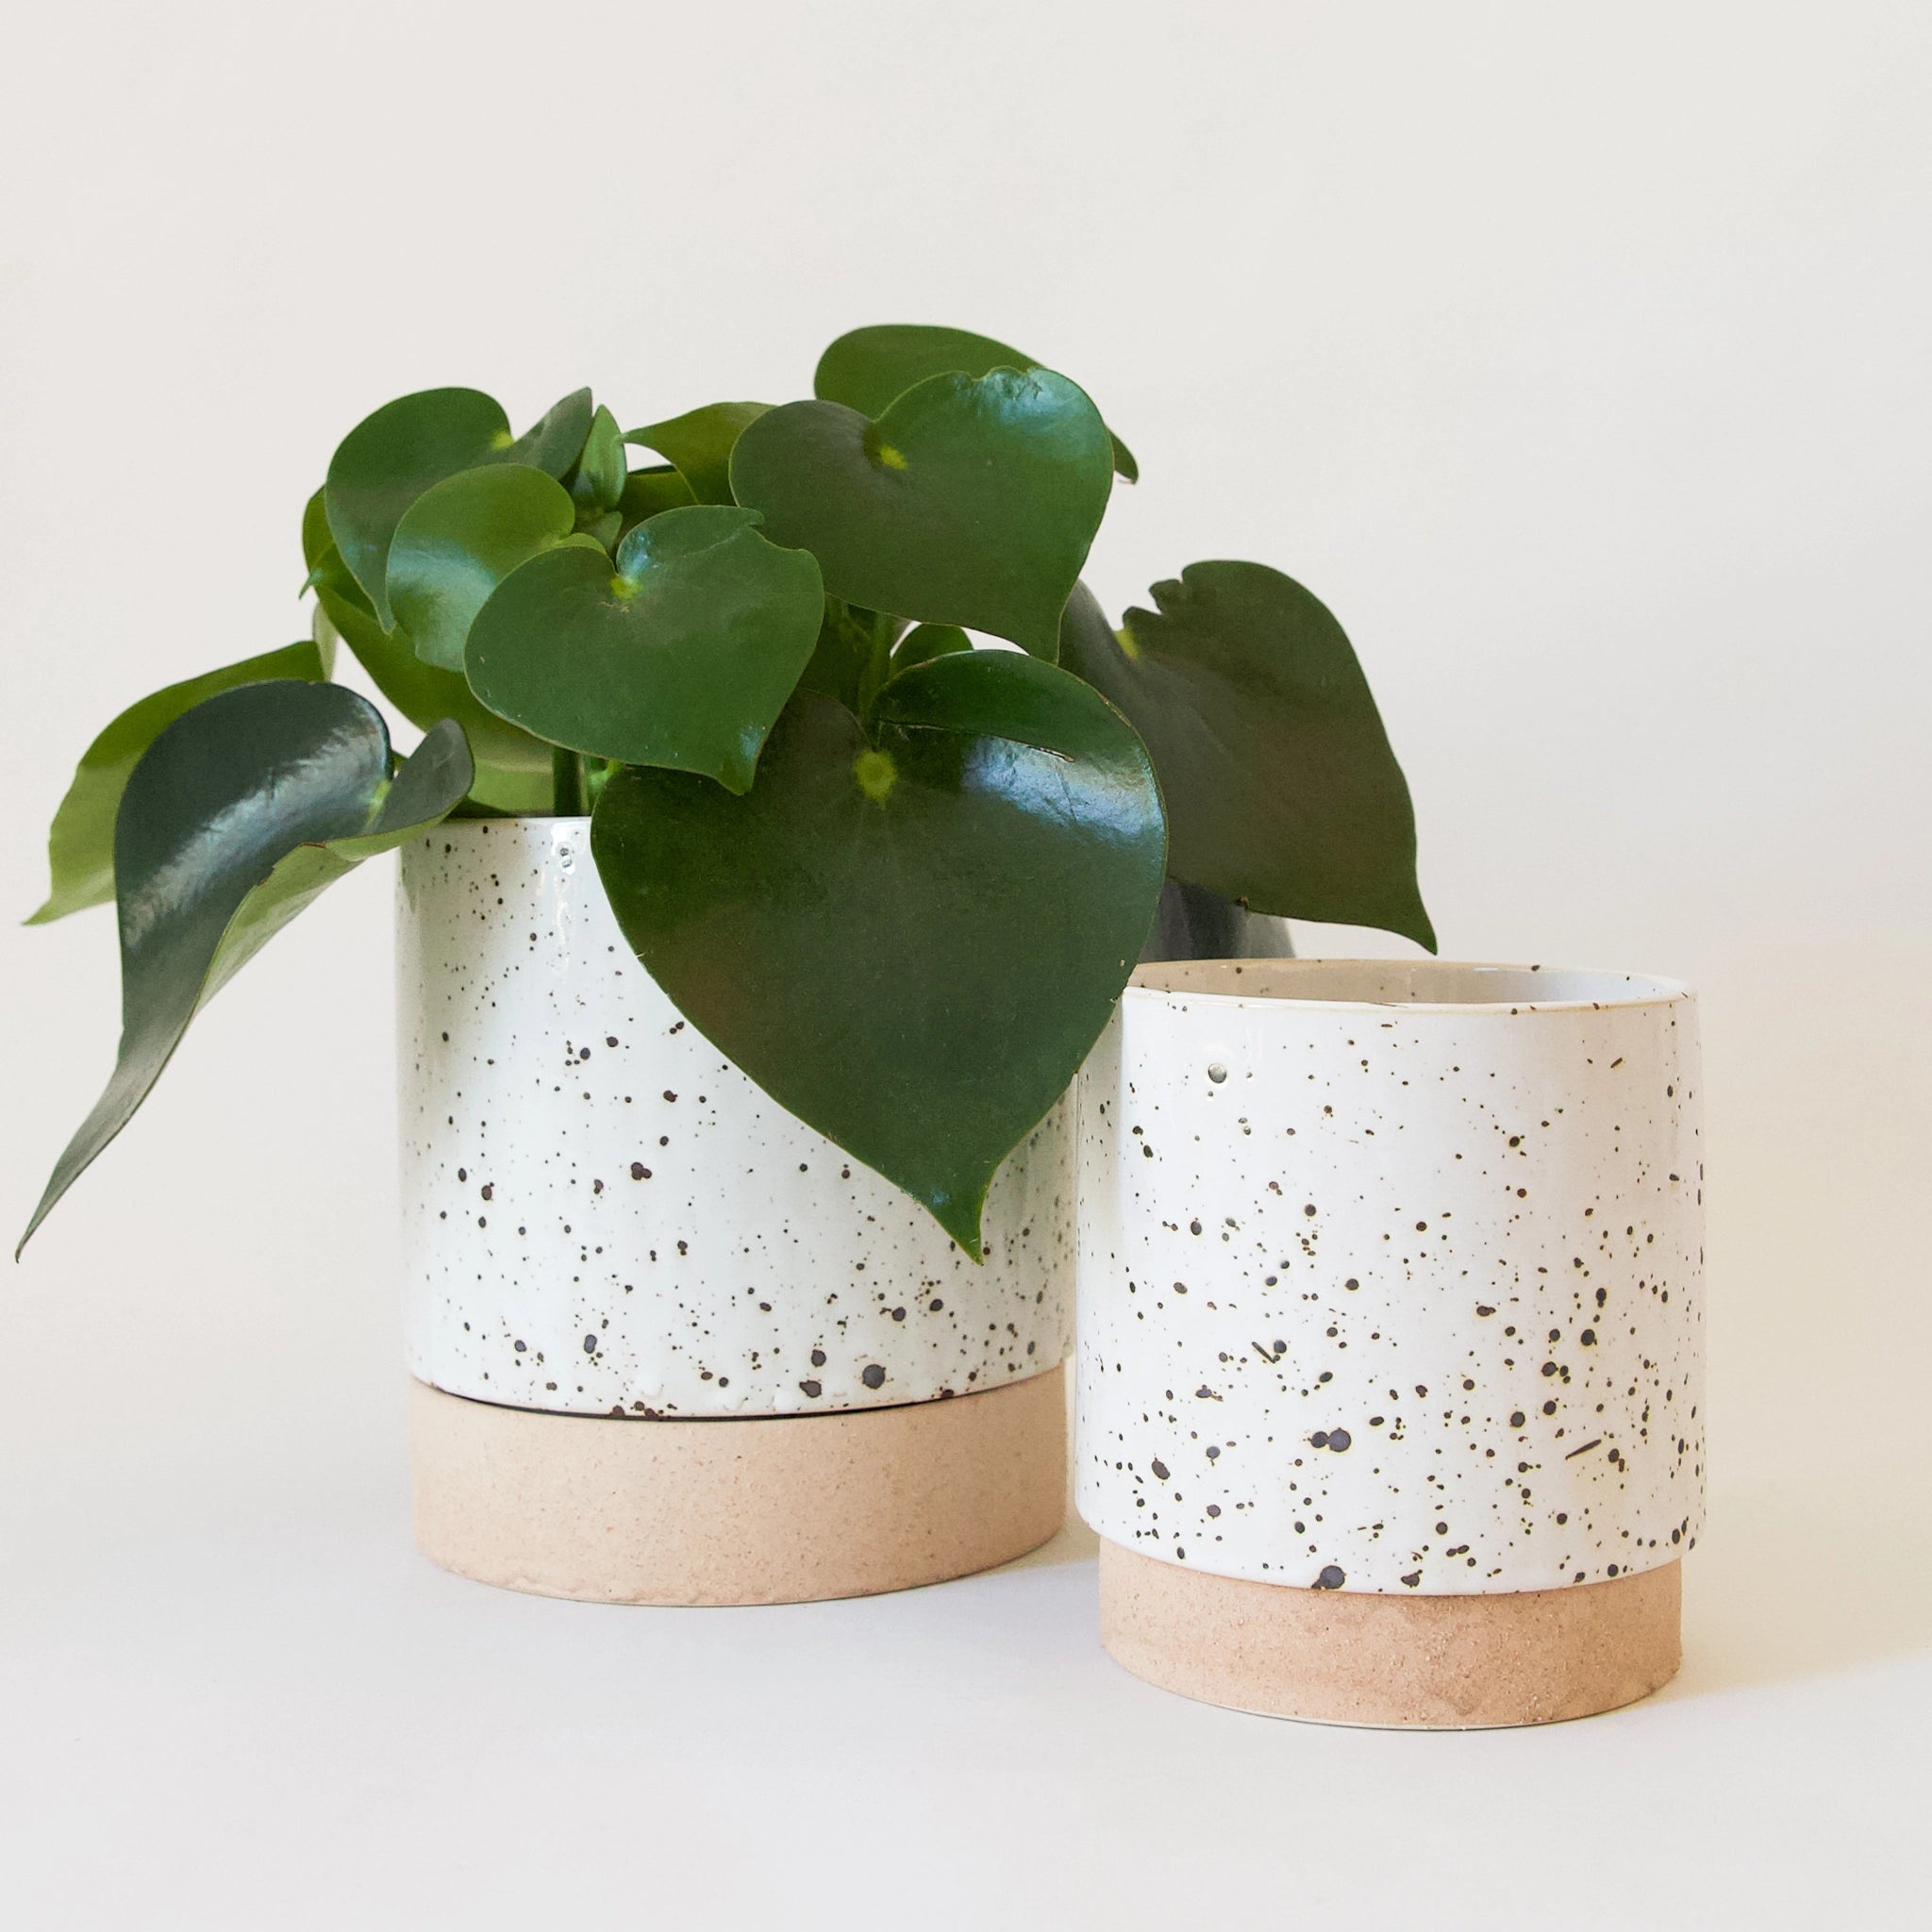 two pots, a small and large, feature dark speckles on a white glaze finish. both have a stoneware base. the large pot is filled with a lush green plant.